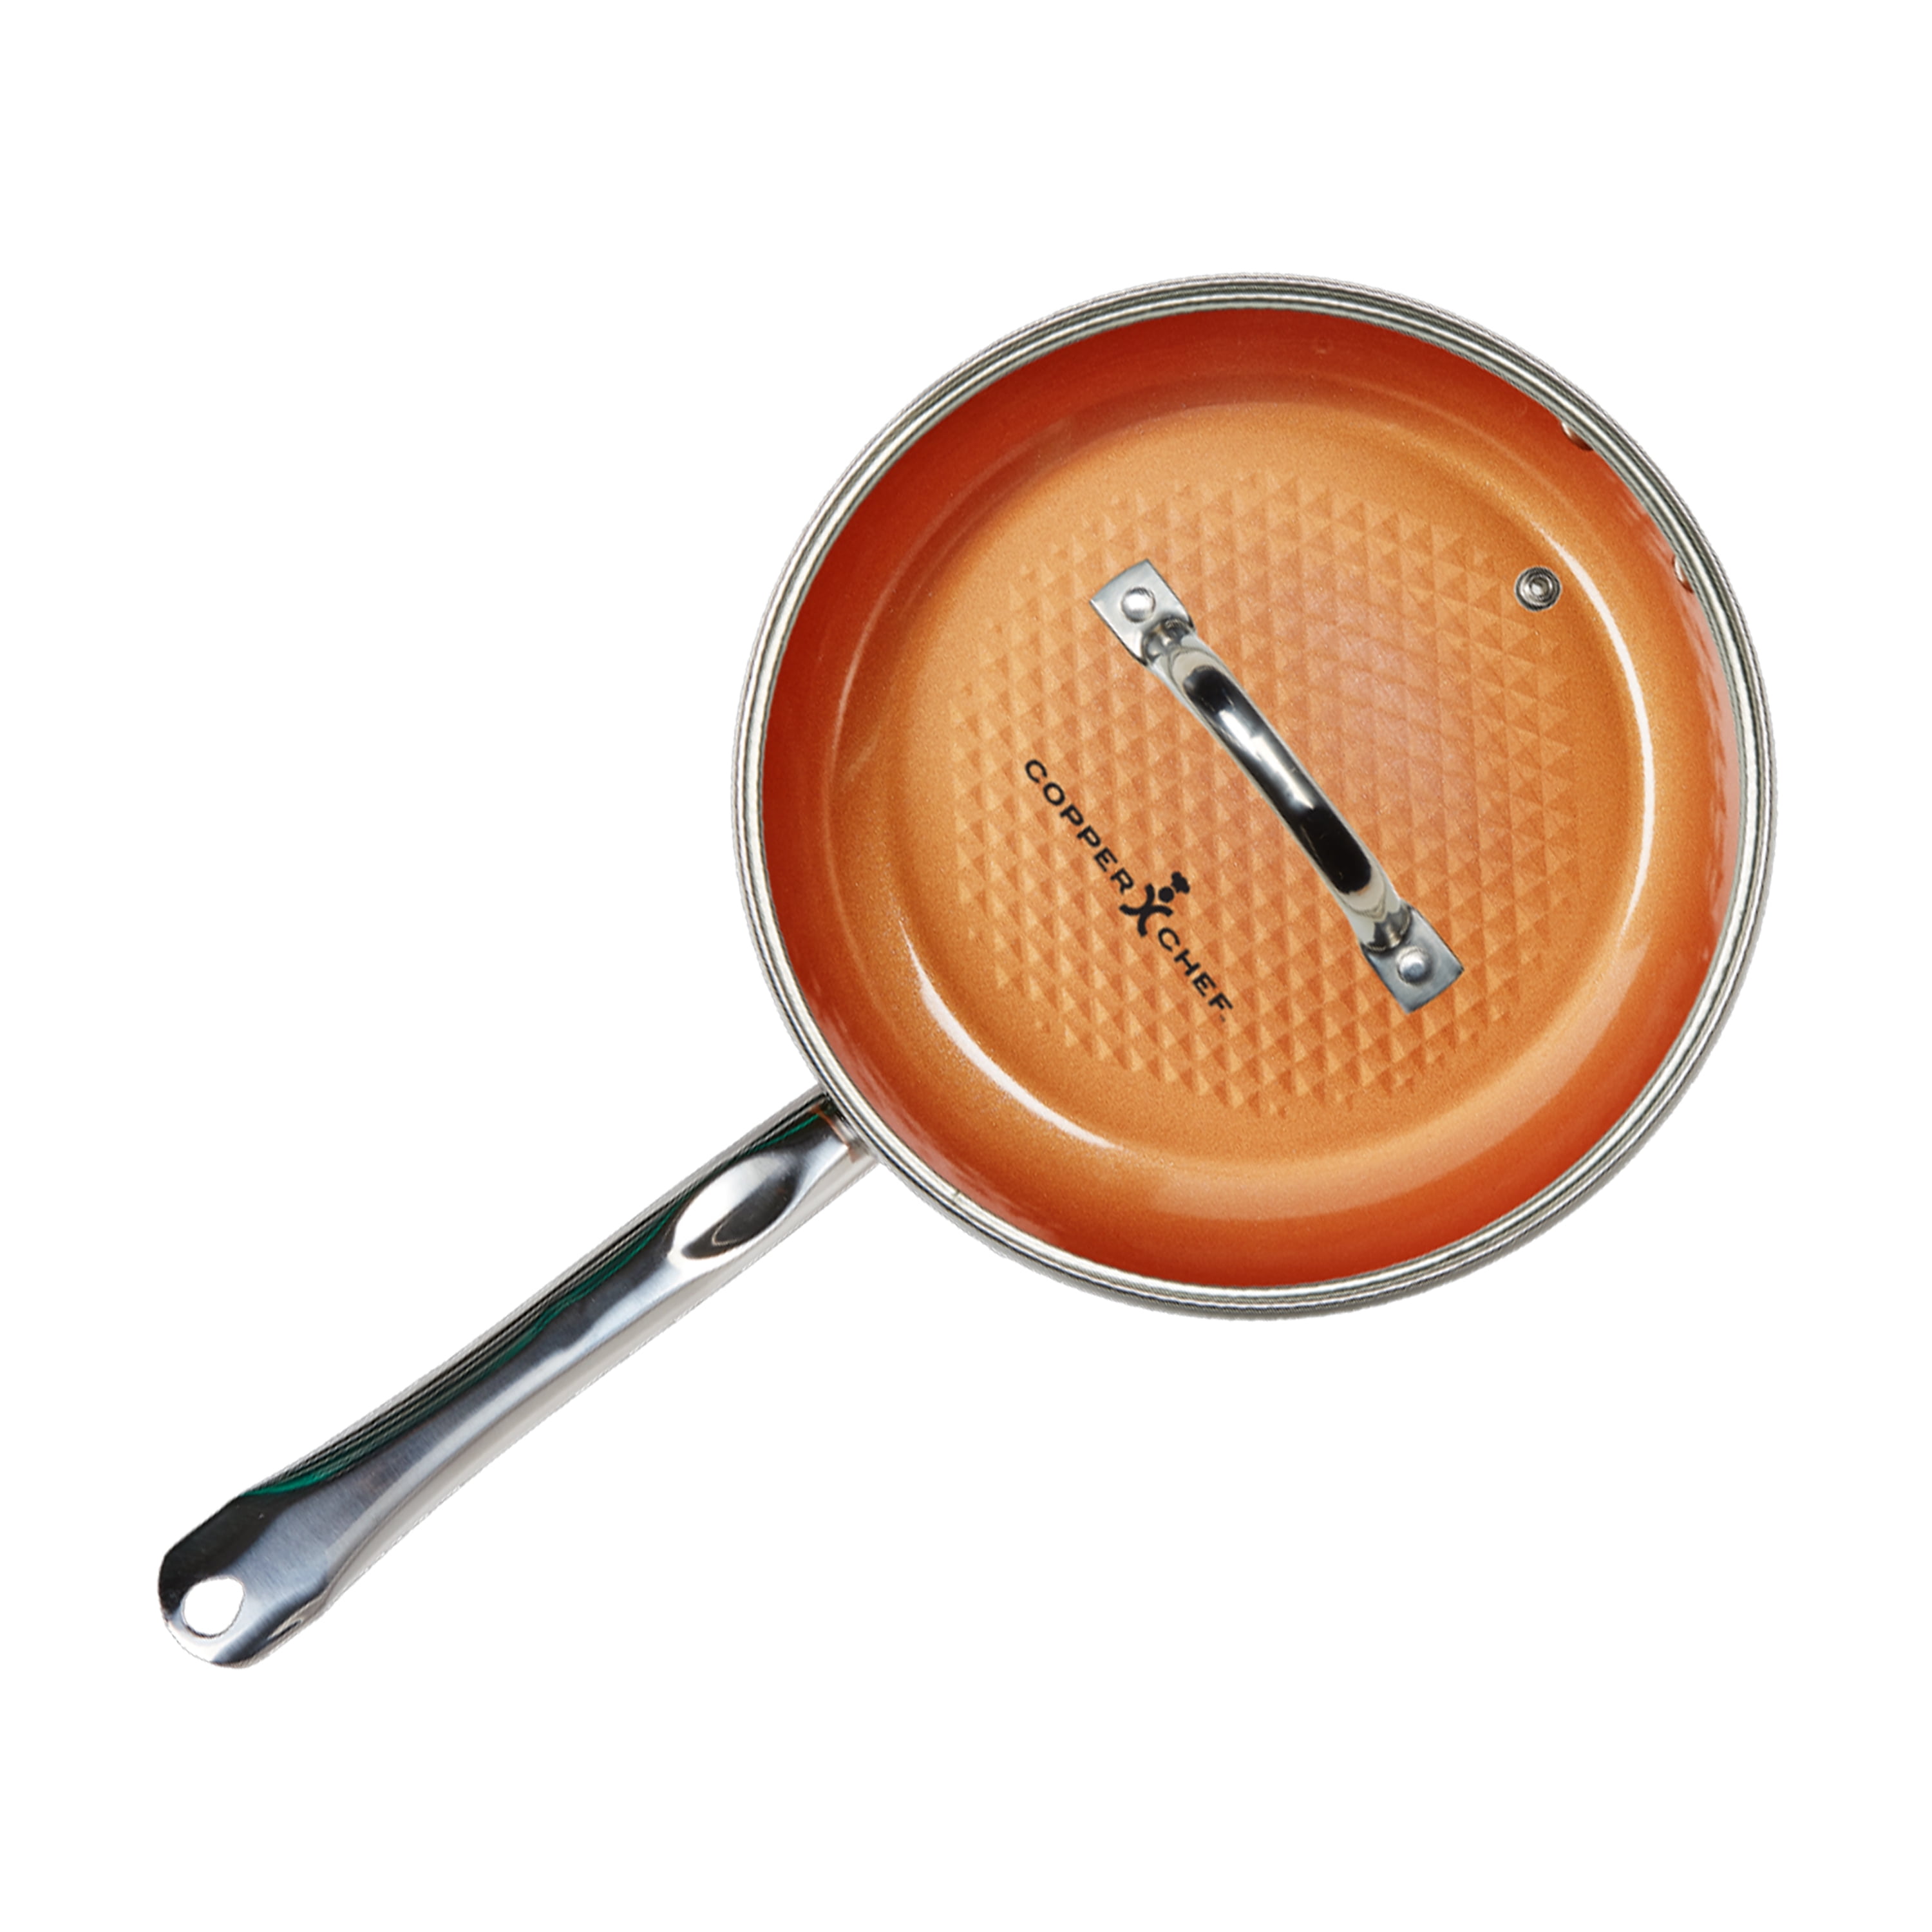 Details about   Copper Chef 10'' Round Frying Ceramic Non-stick Diamond Pan With Lid As Seen on 